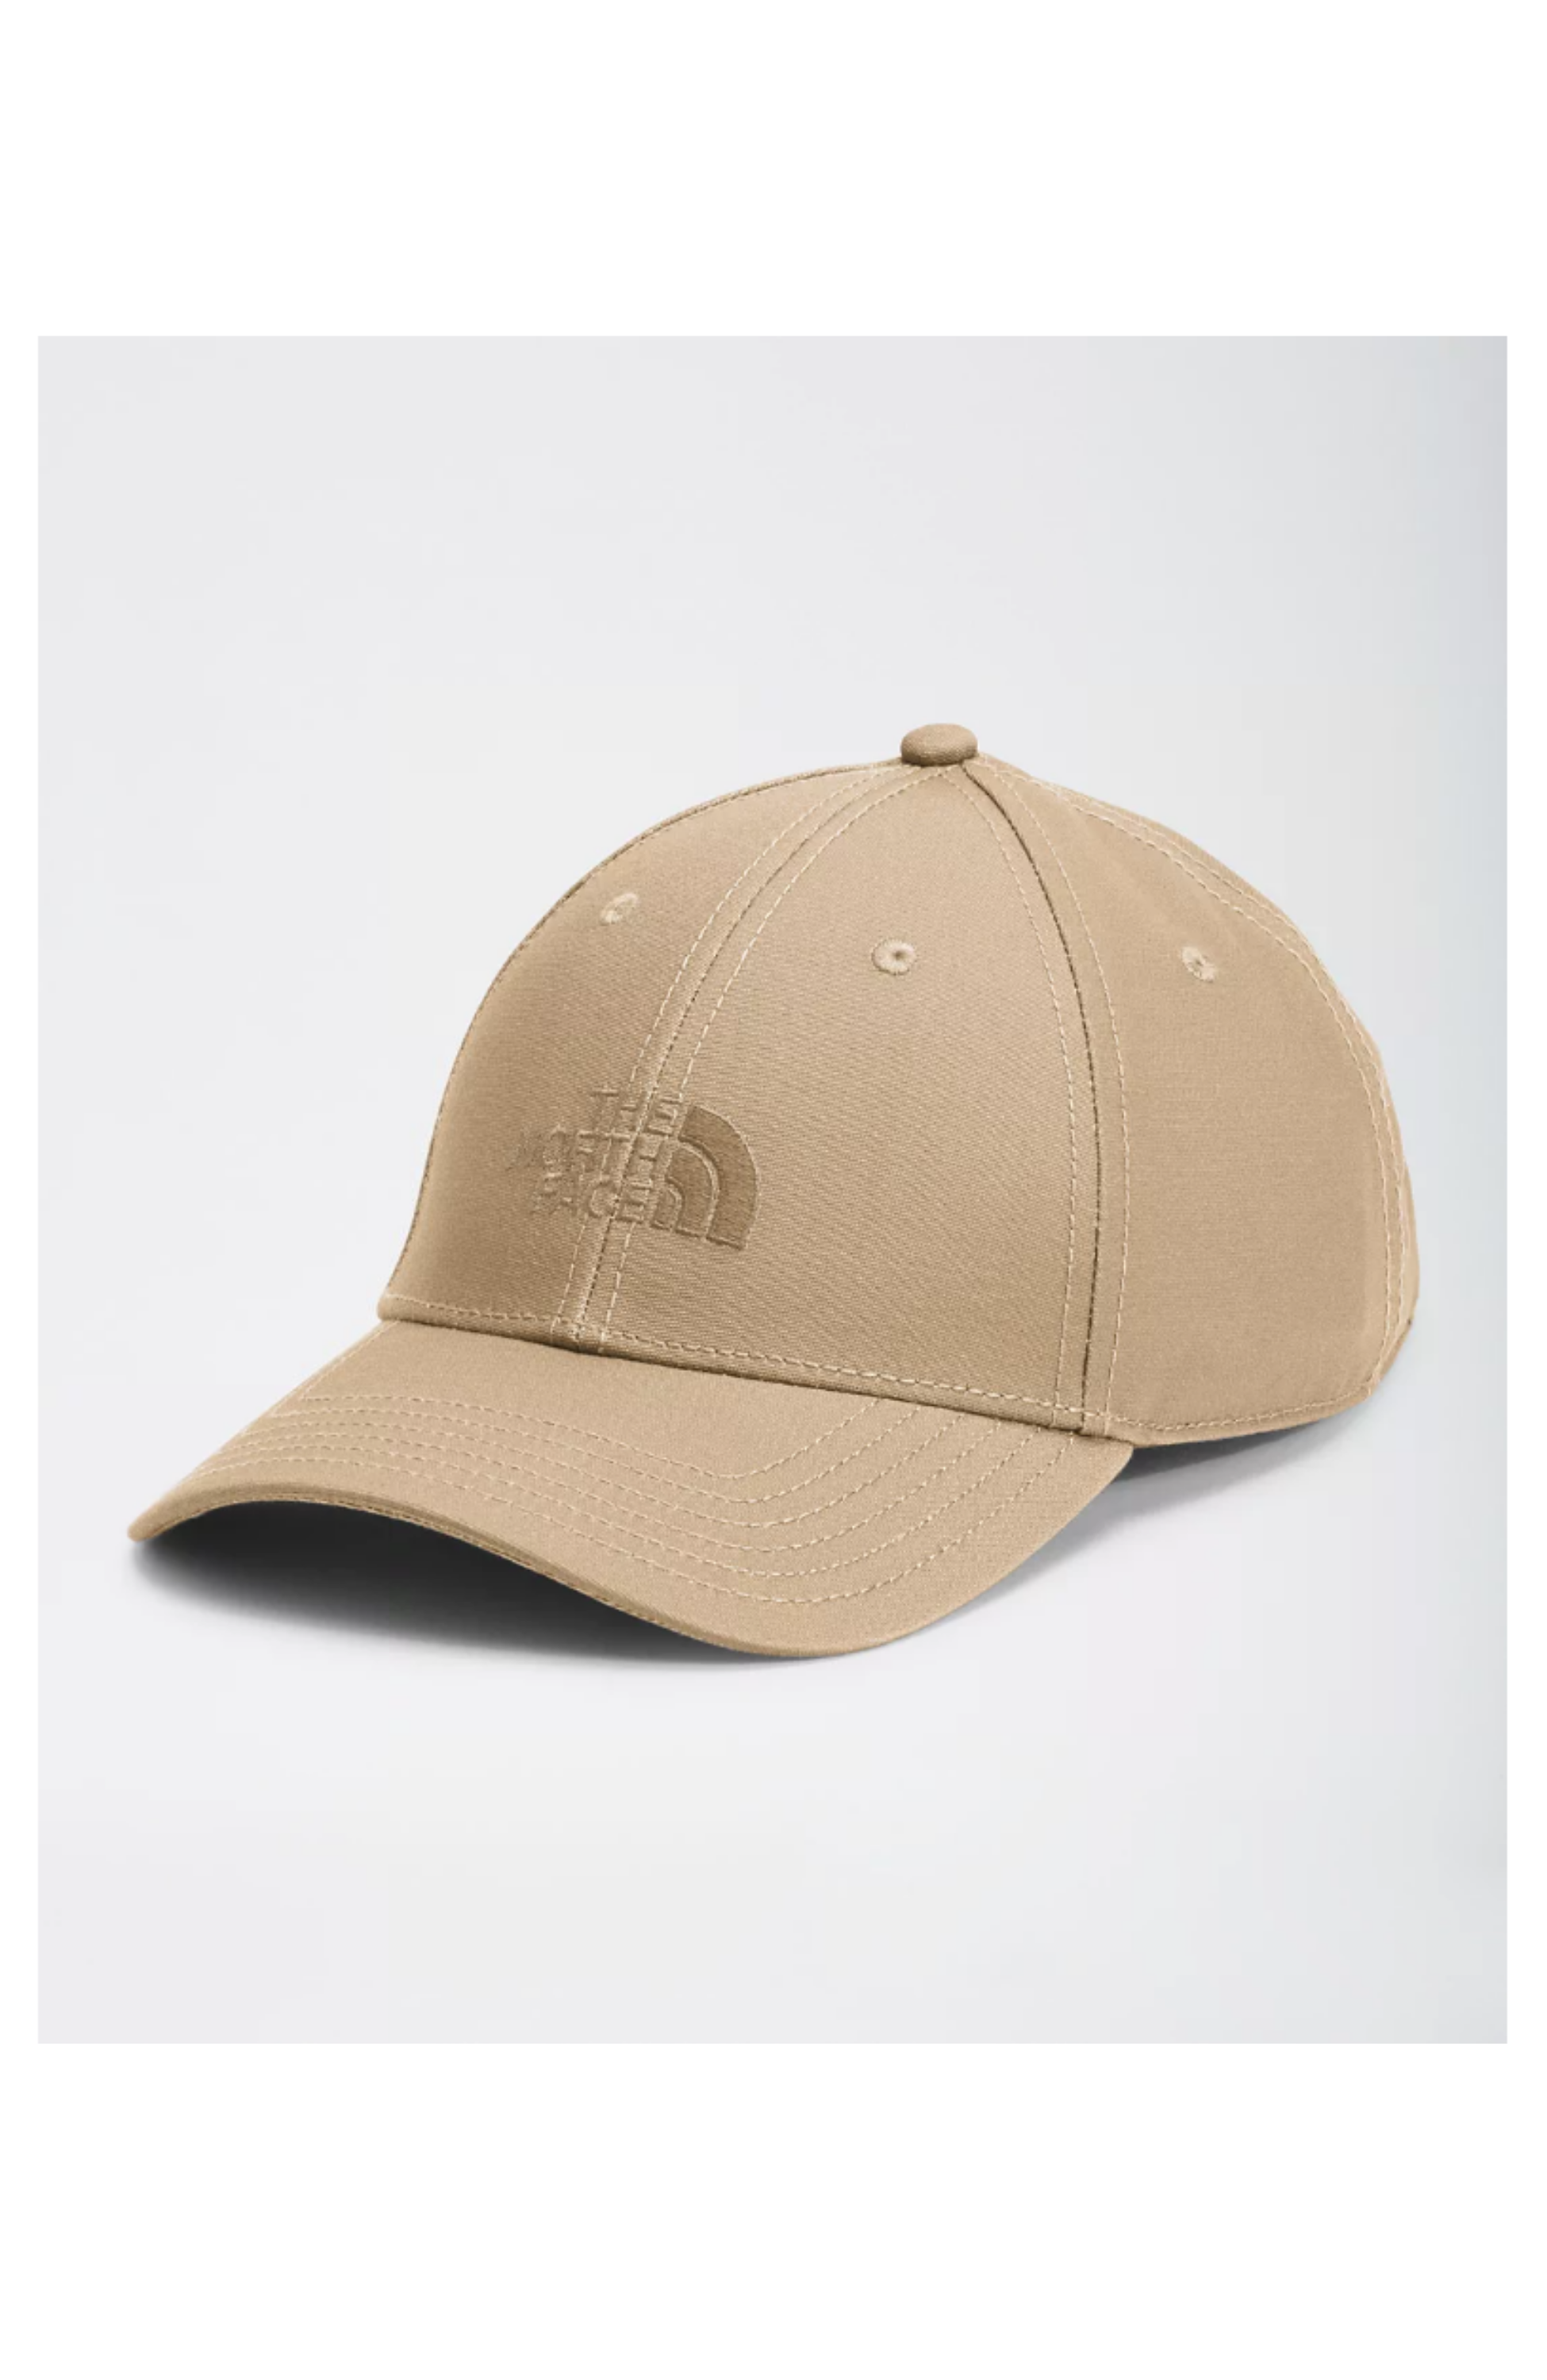 NF0A4VSV RECYCLED 66 CLASSIC HAT NORTH FACE – 310 Rosemont